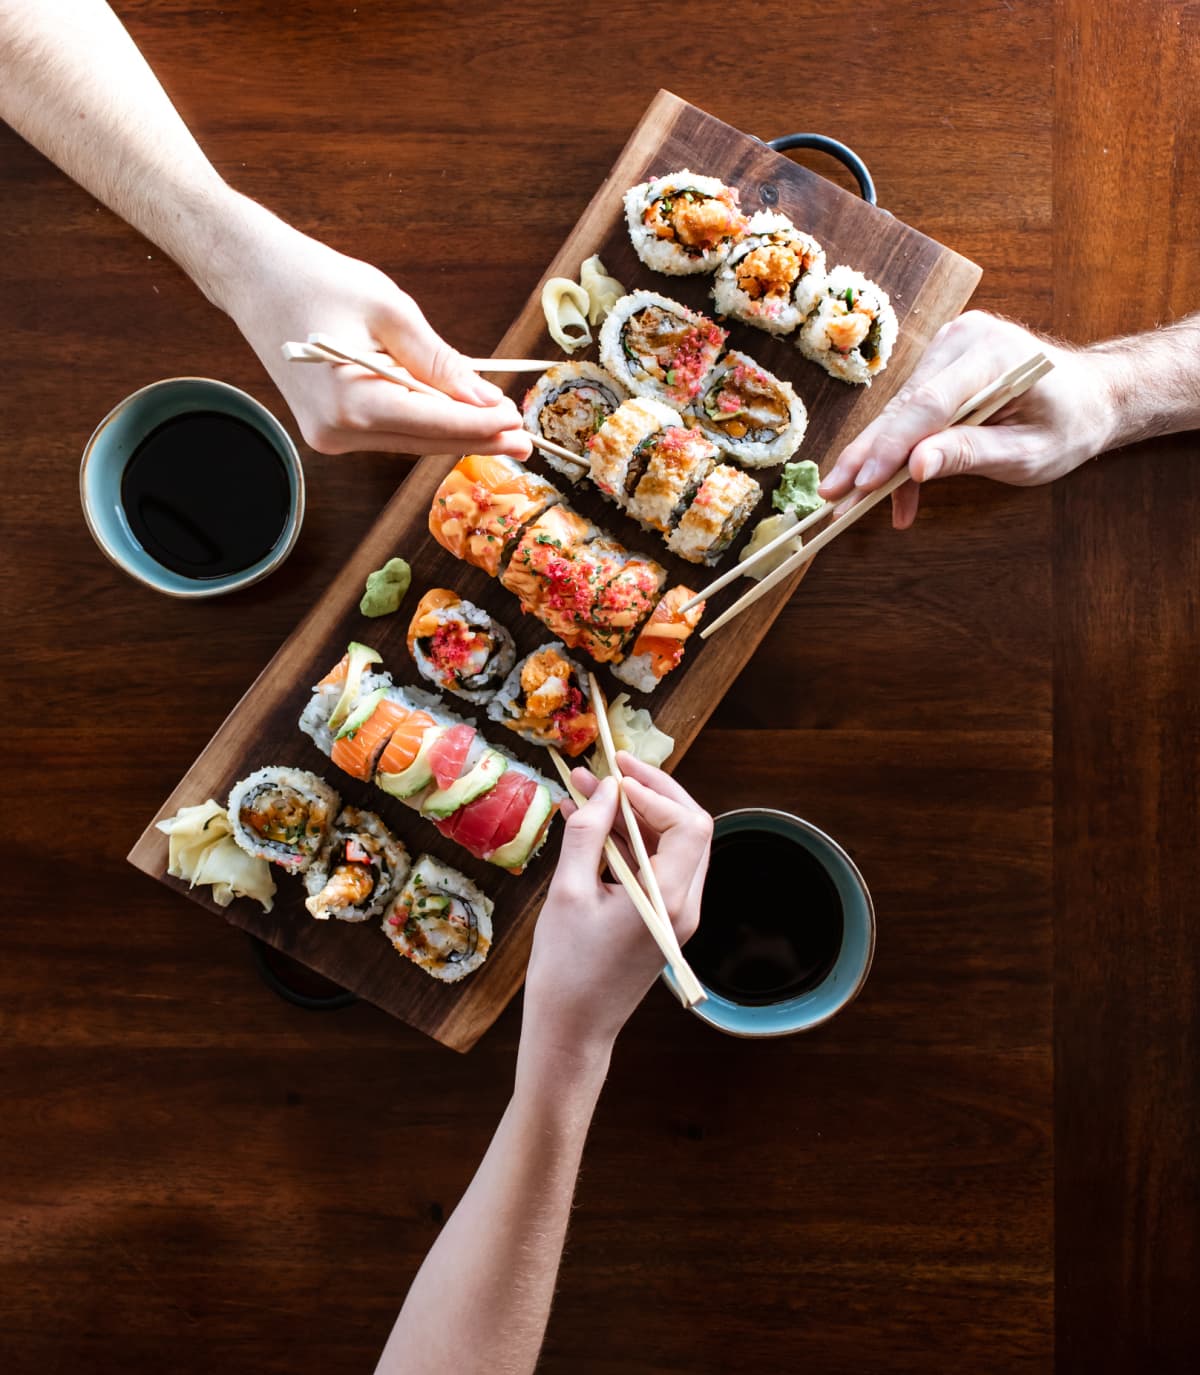 Hands using chopsticks to pick up pieces of sushi rolls from a wooden platter